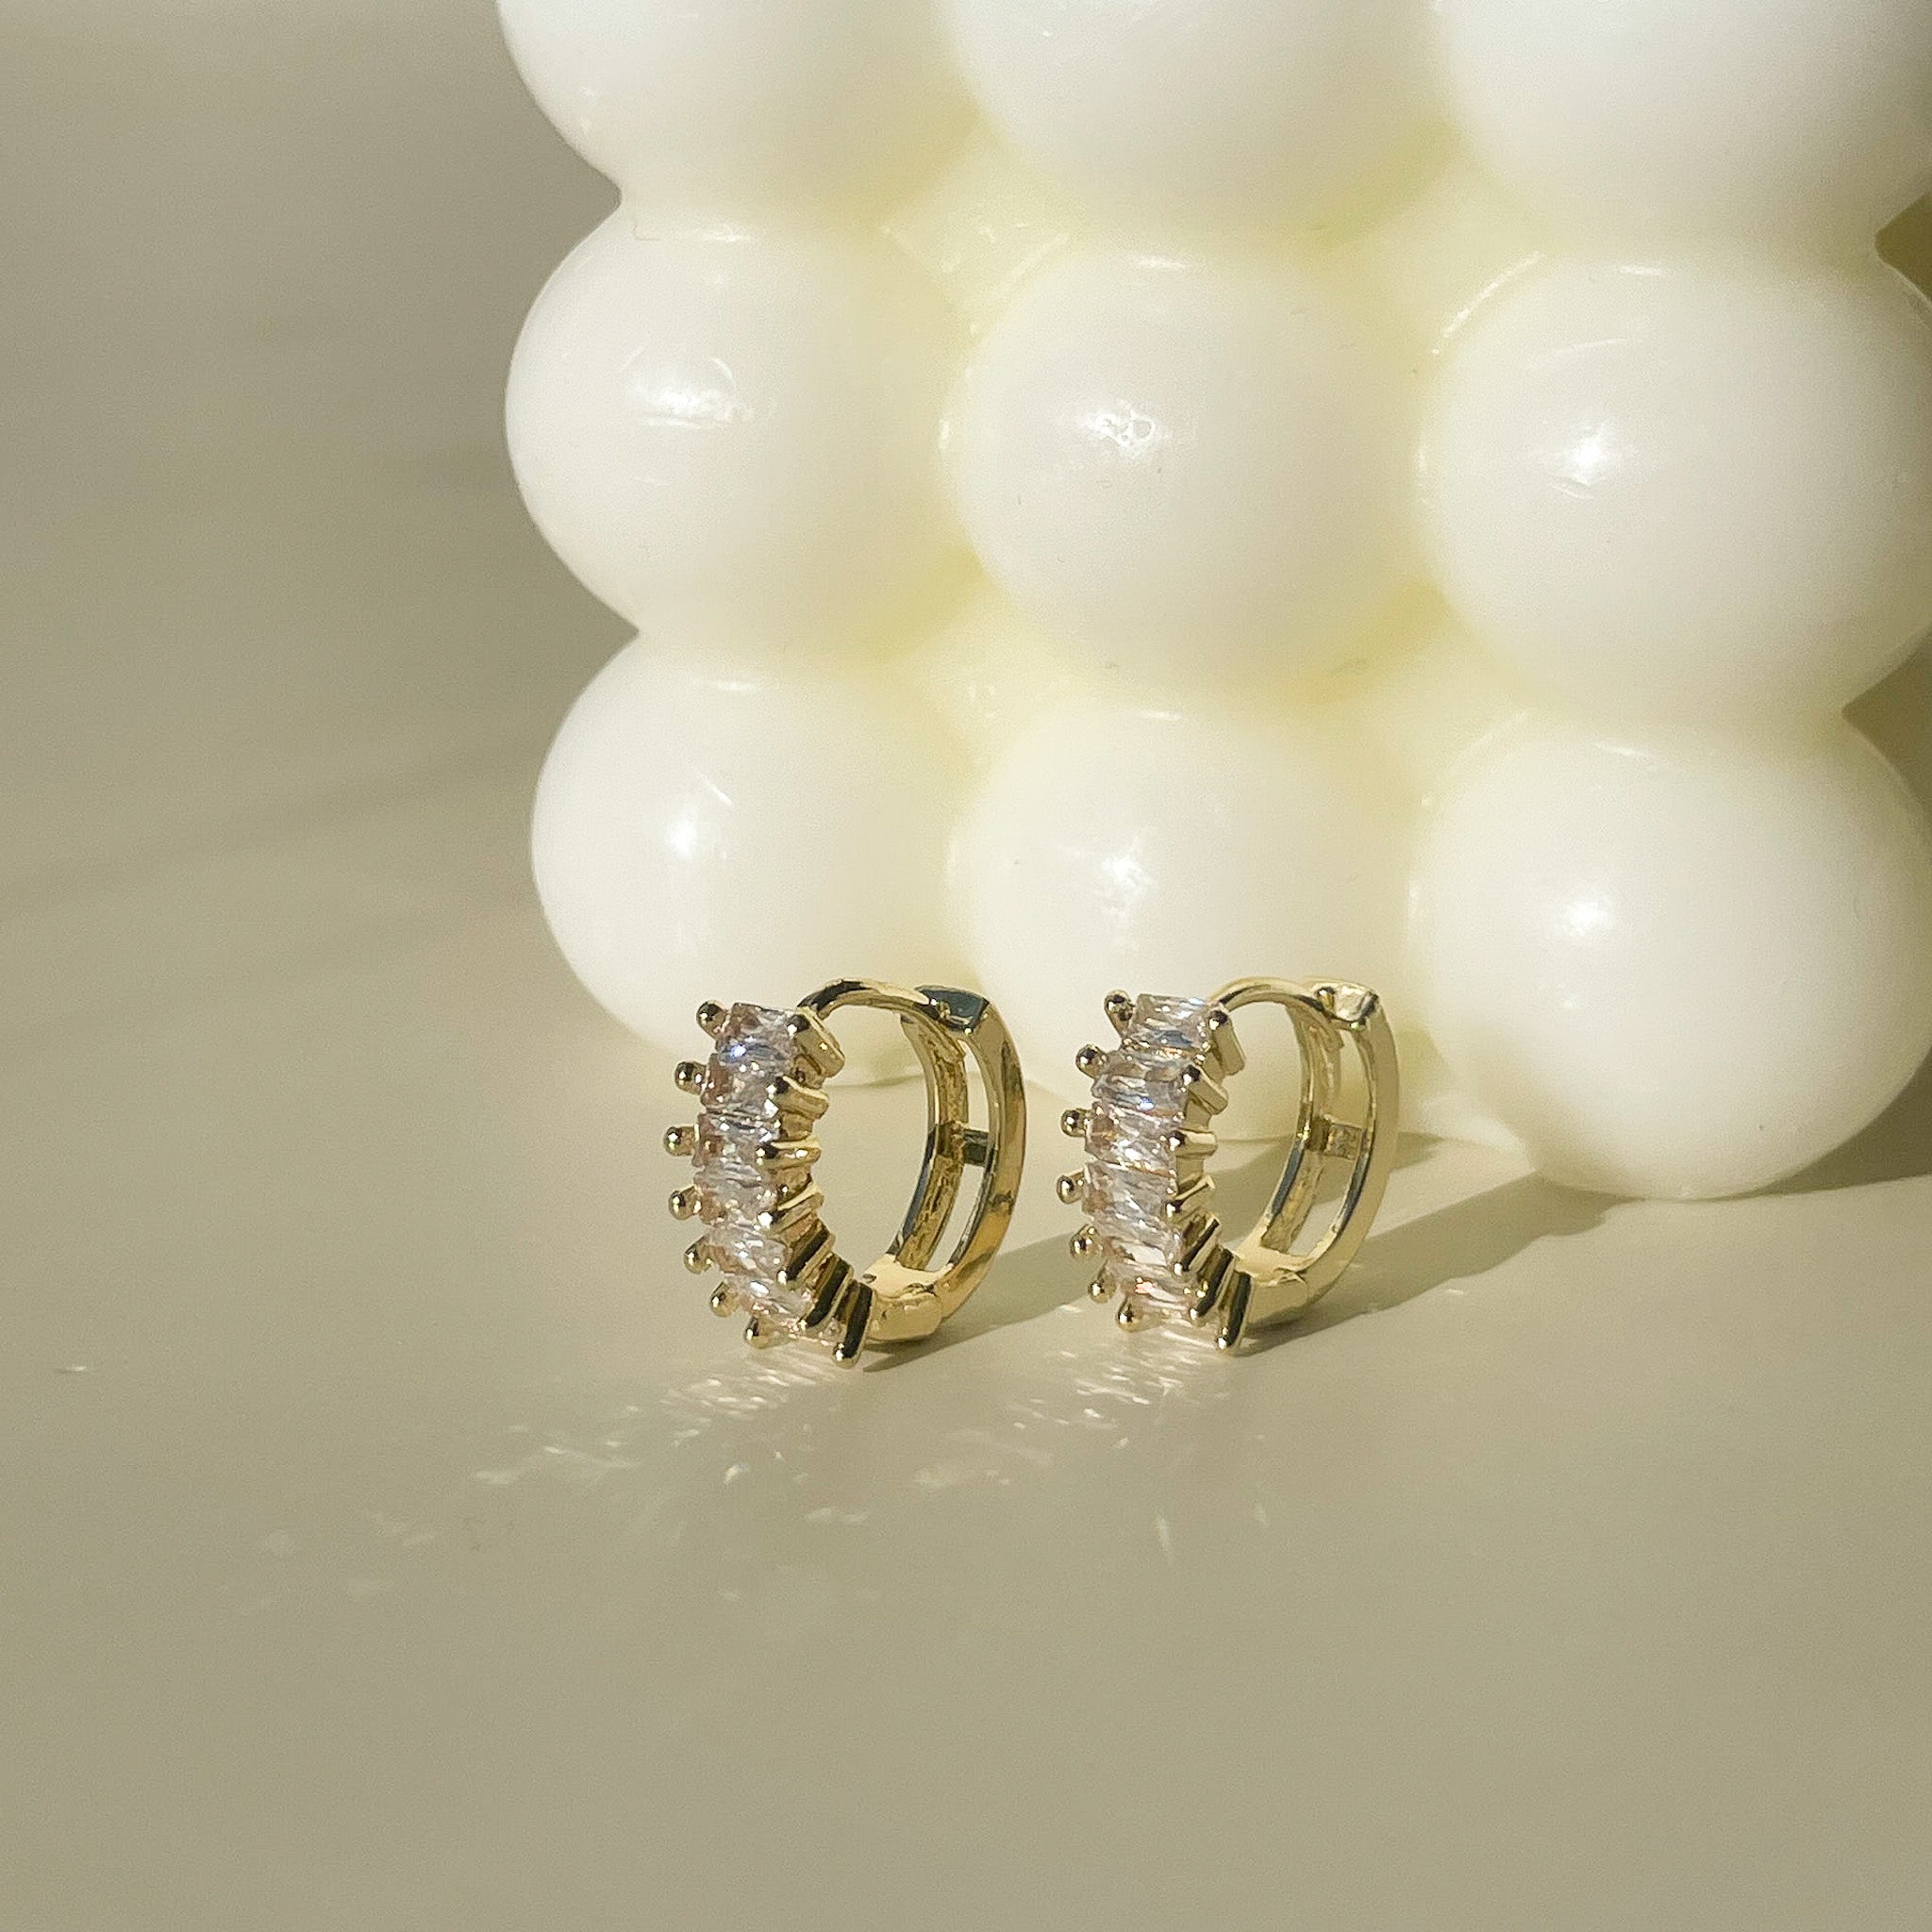 Small gold hoop earrings with diamond and cubic zirconia. These small and tiny huggie hoops are made from high quality sterling silver and 18k gold filled. Small white gold hoops real gold